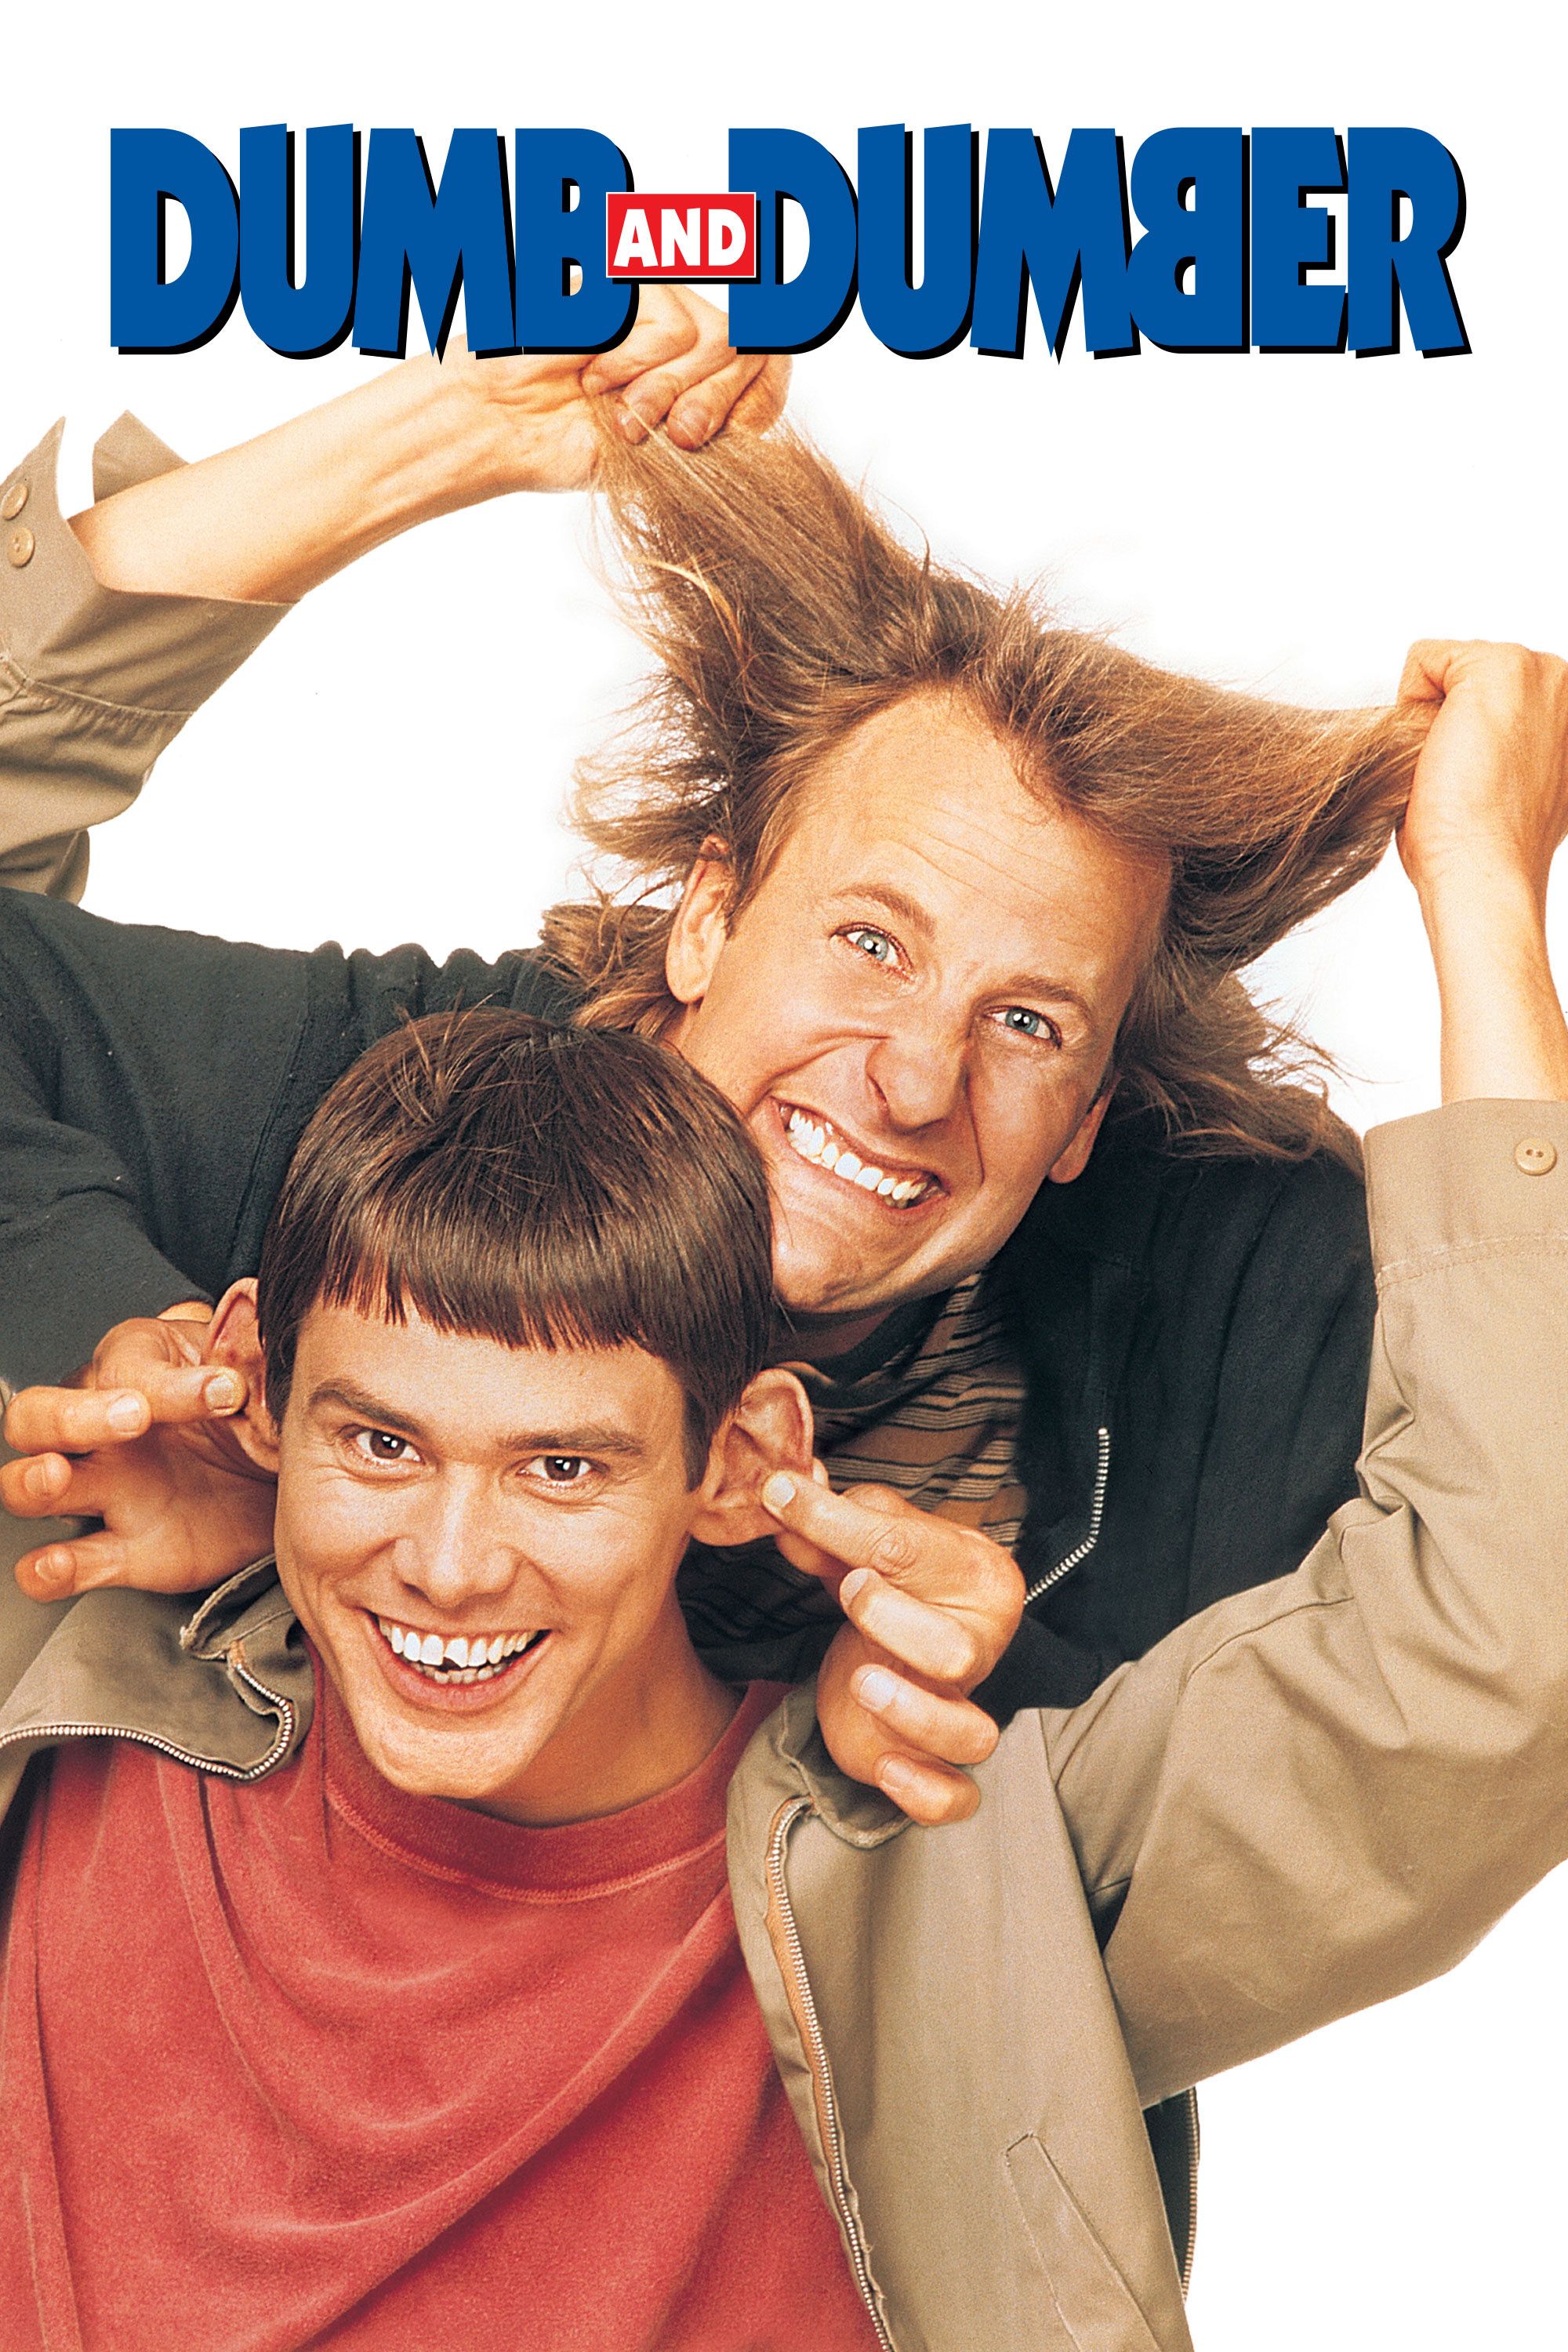 watch dumb and dumber 2 on viooz